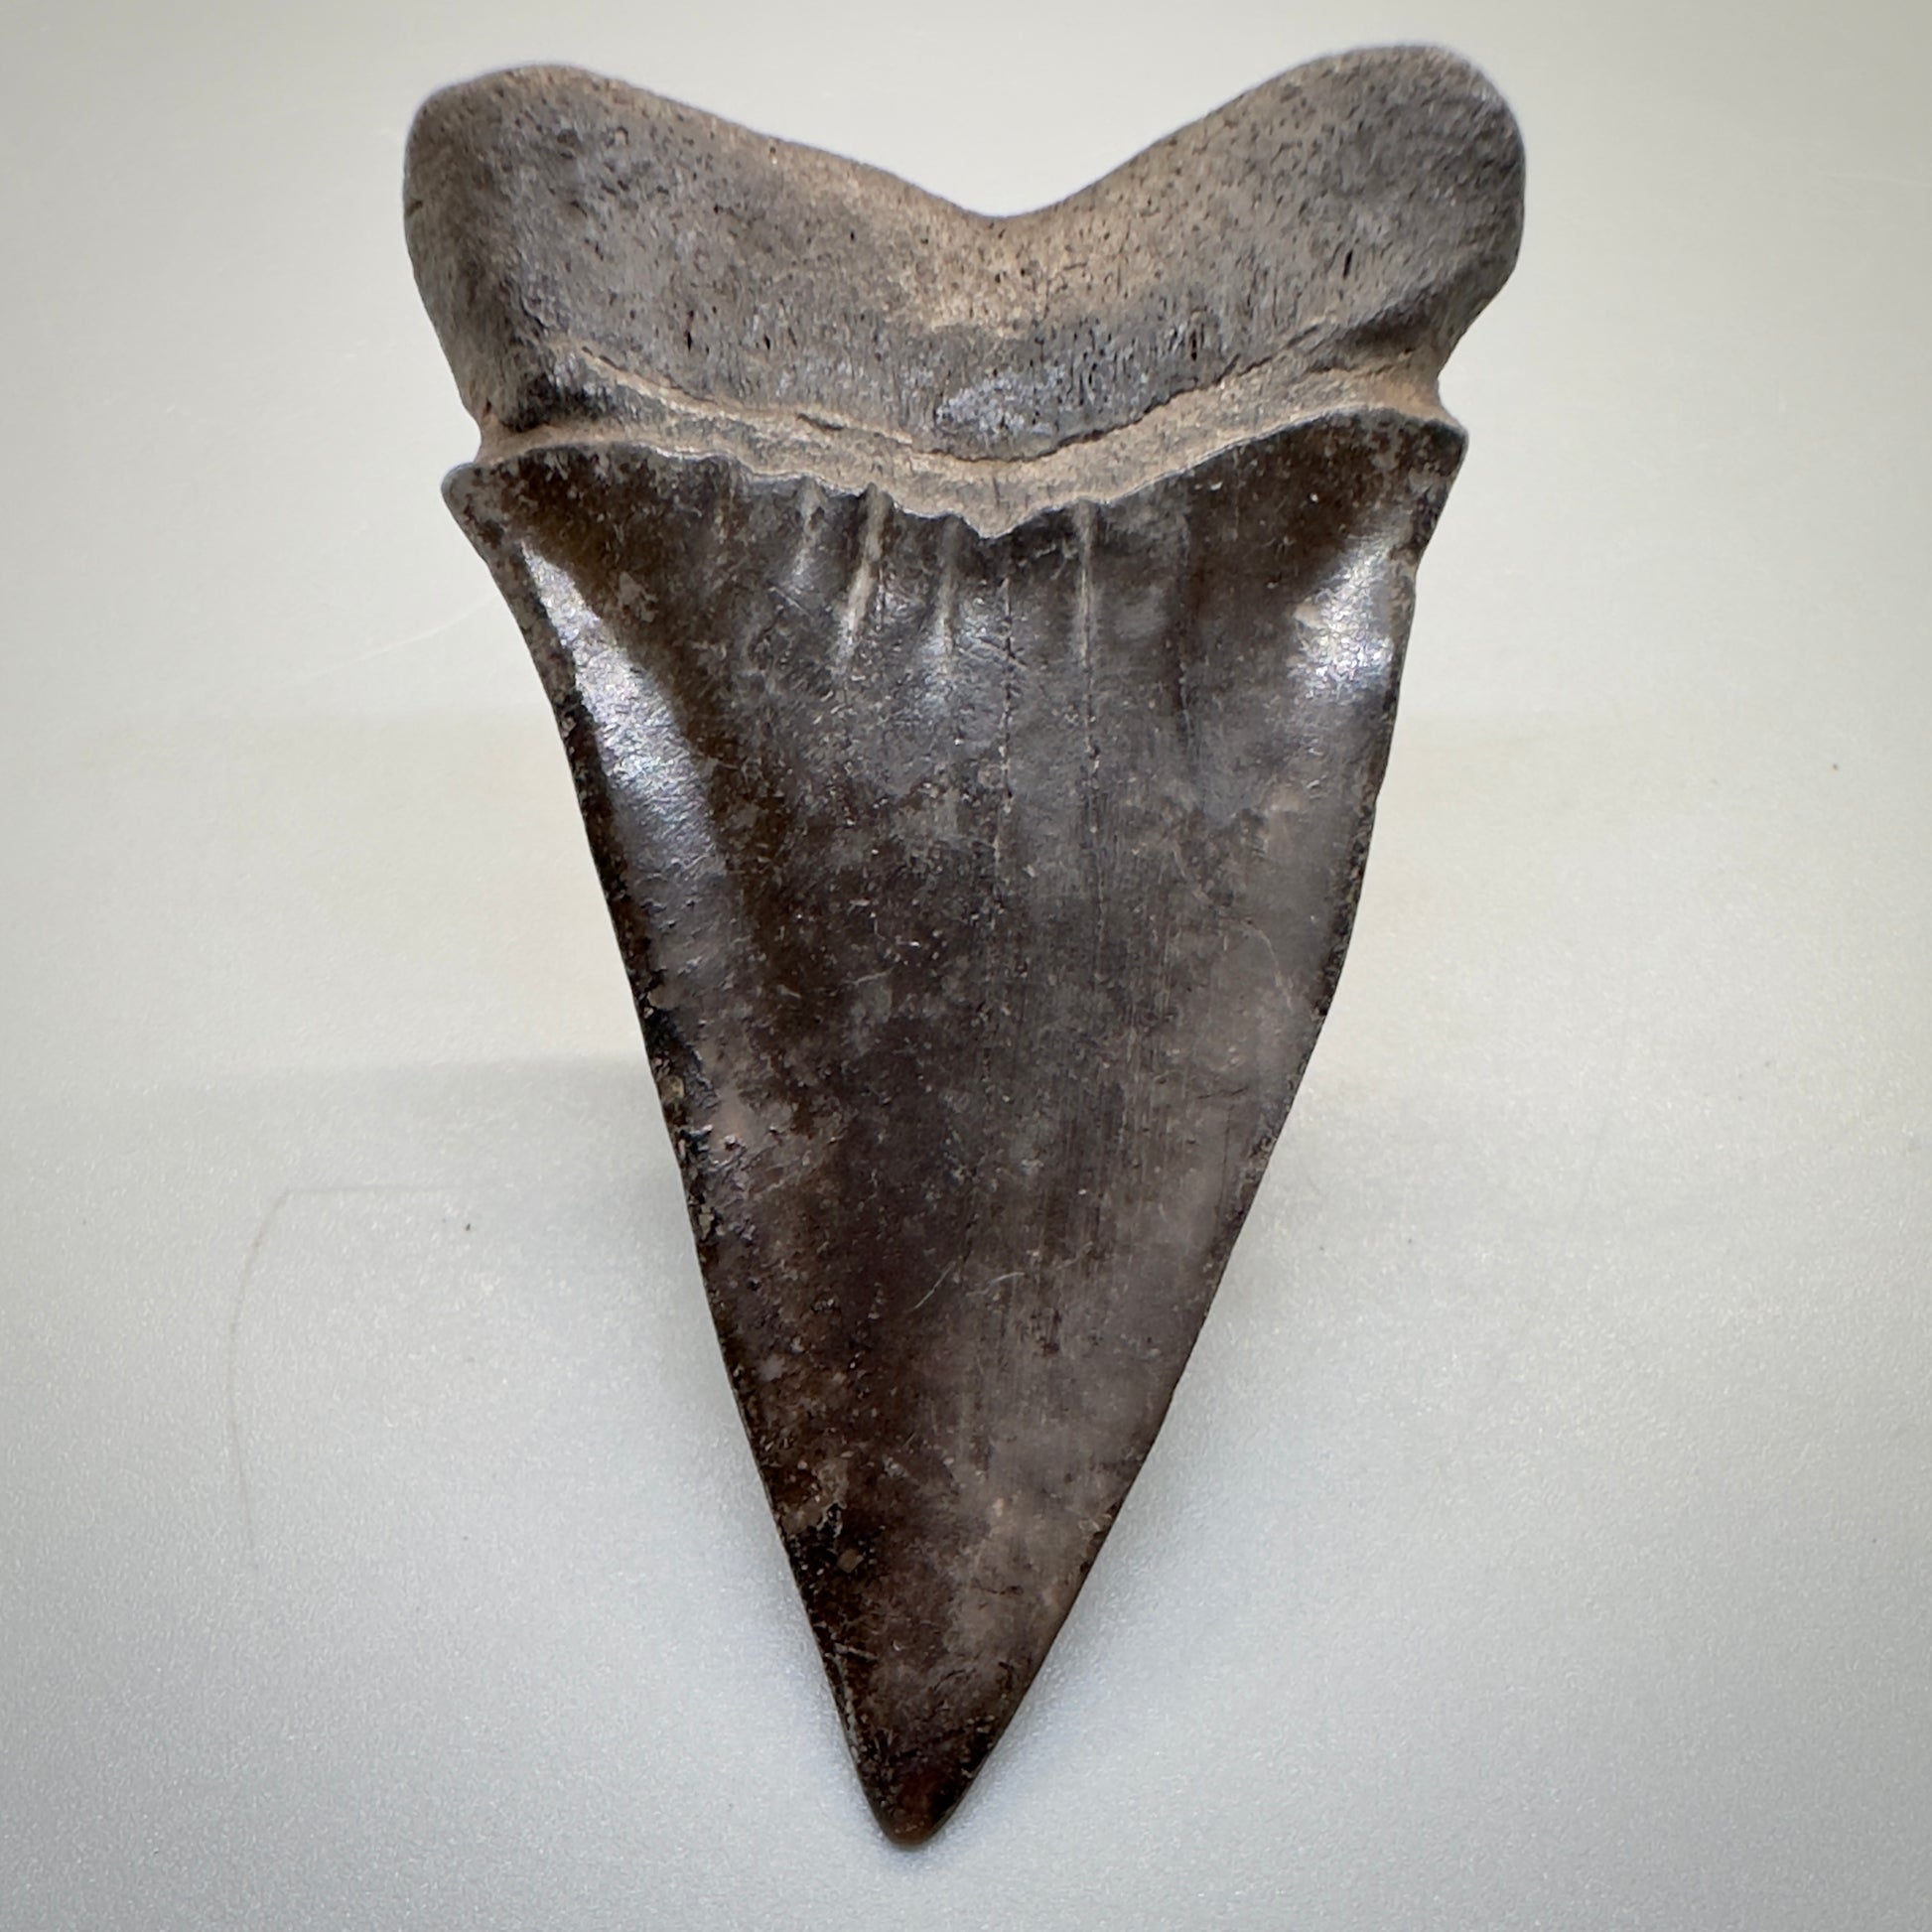 2.42 inches brown/red Extinct Mako - isurus hastalis shark tooth from southeast, USA M509 back down